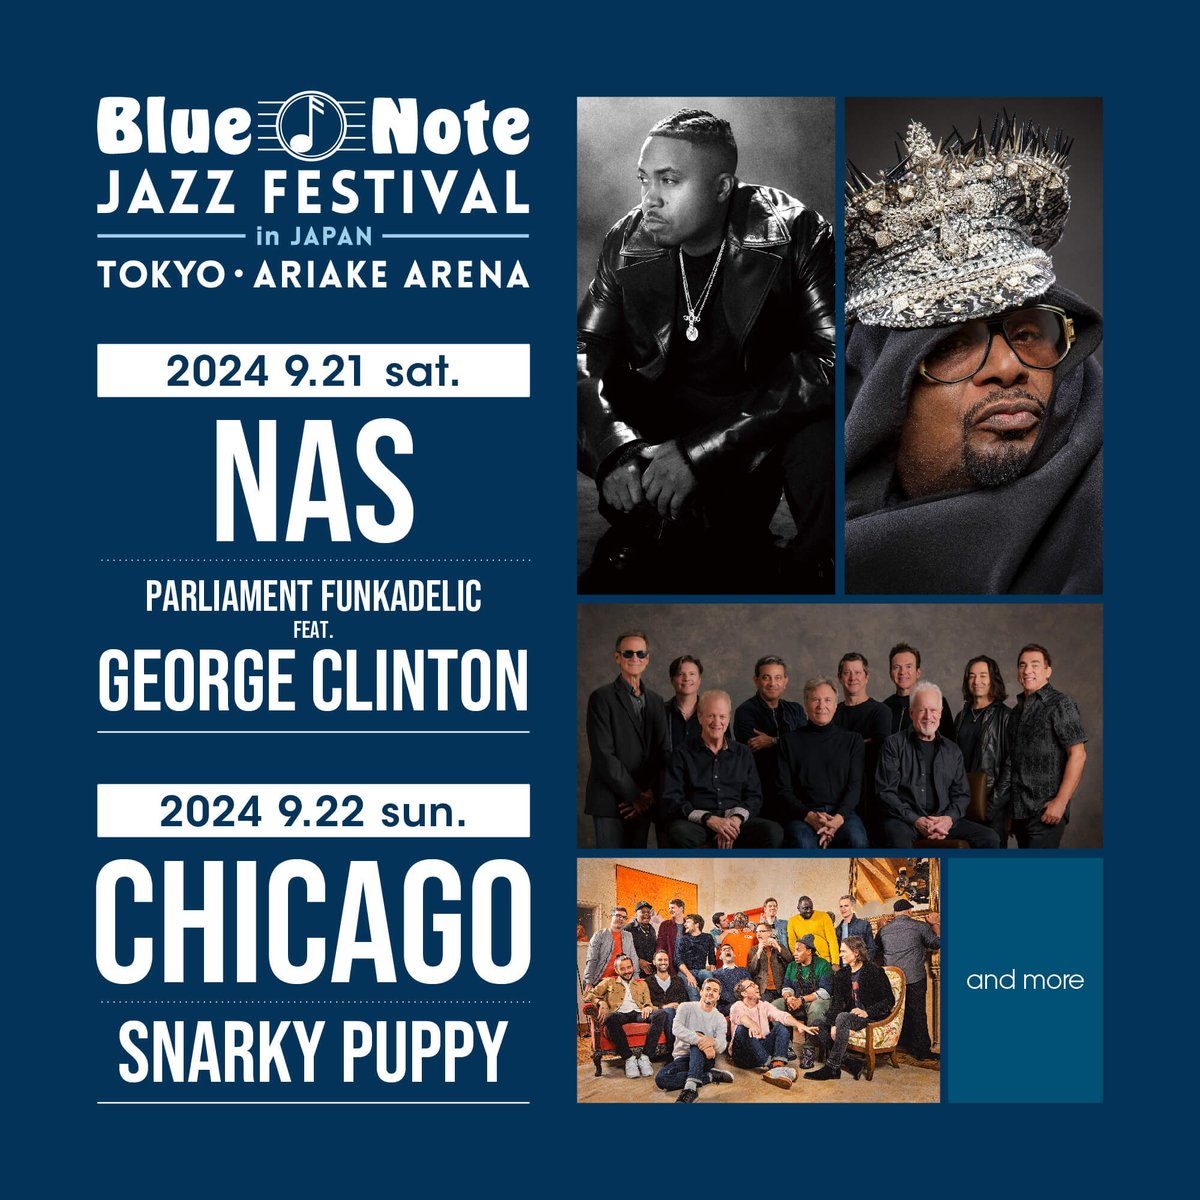 【Blue Note JAZZ FESTIVAL in JAPAN 2024】
会場：東京・有明アリーナ

5月16日  12:00〜
CREATIVEMAN会員最速チケット先行受付開始！！

9/21(土) NAS / PARLIAMENT FUNKADELIC FEAT. GEORGE CLINTON
9/22(日) CHICAGO / SNARKY PUPPY
and more…

詳細
cmp-members.com

#BNJF2024